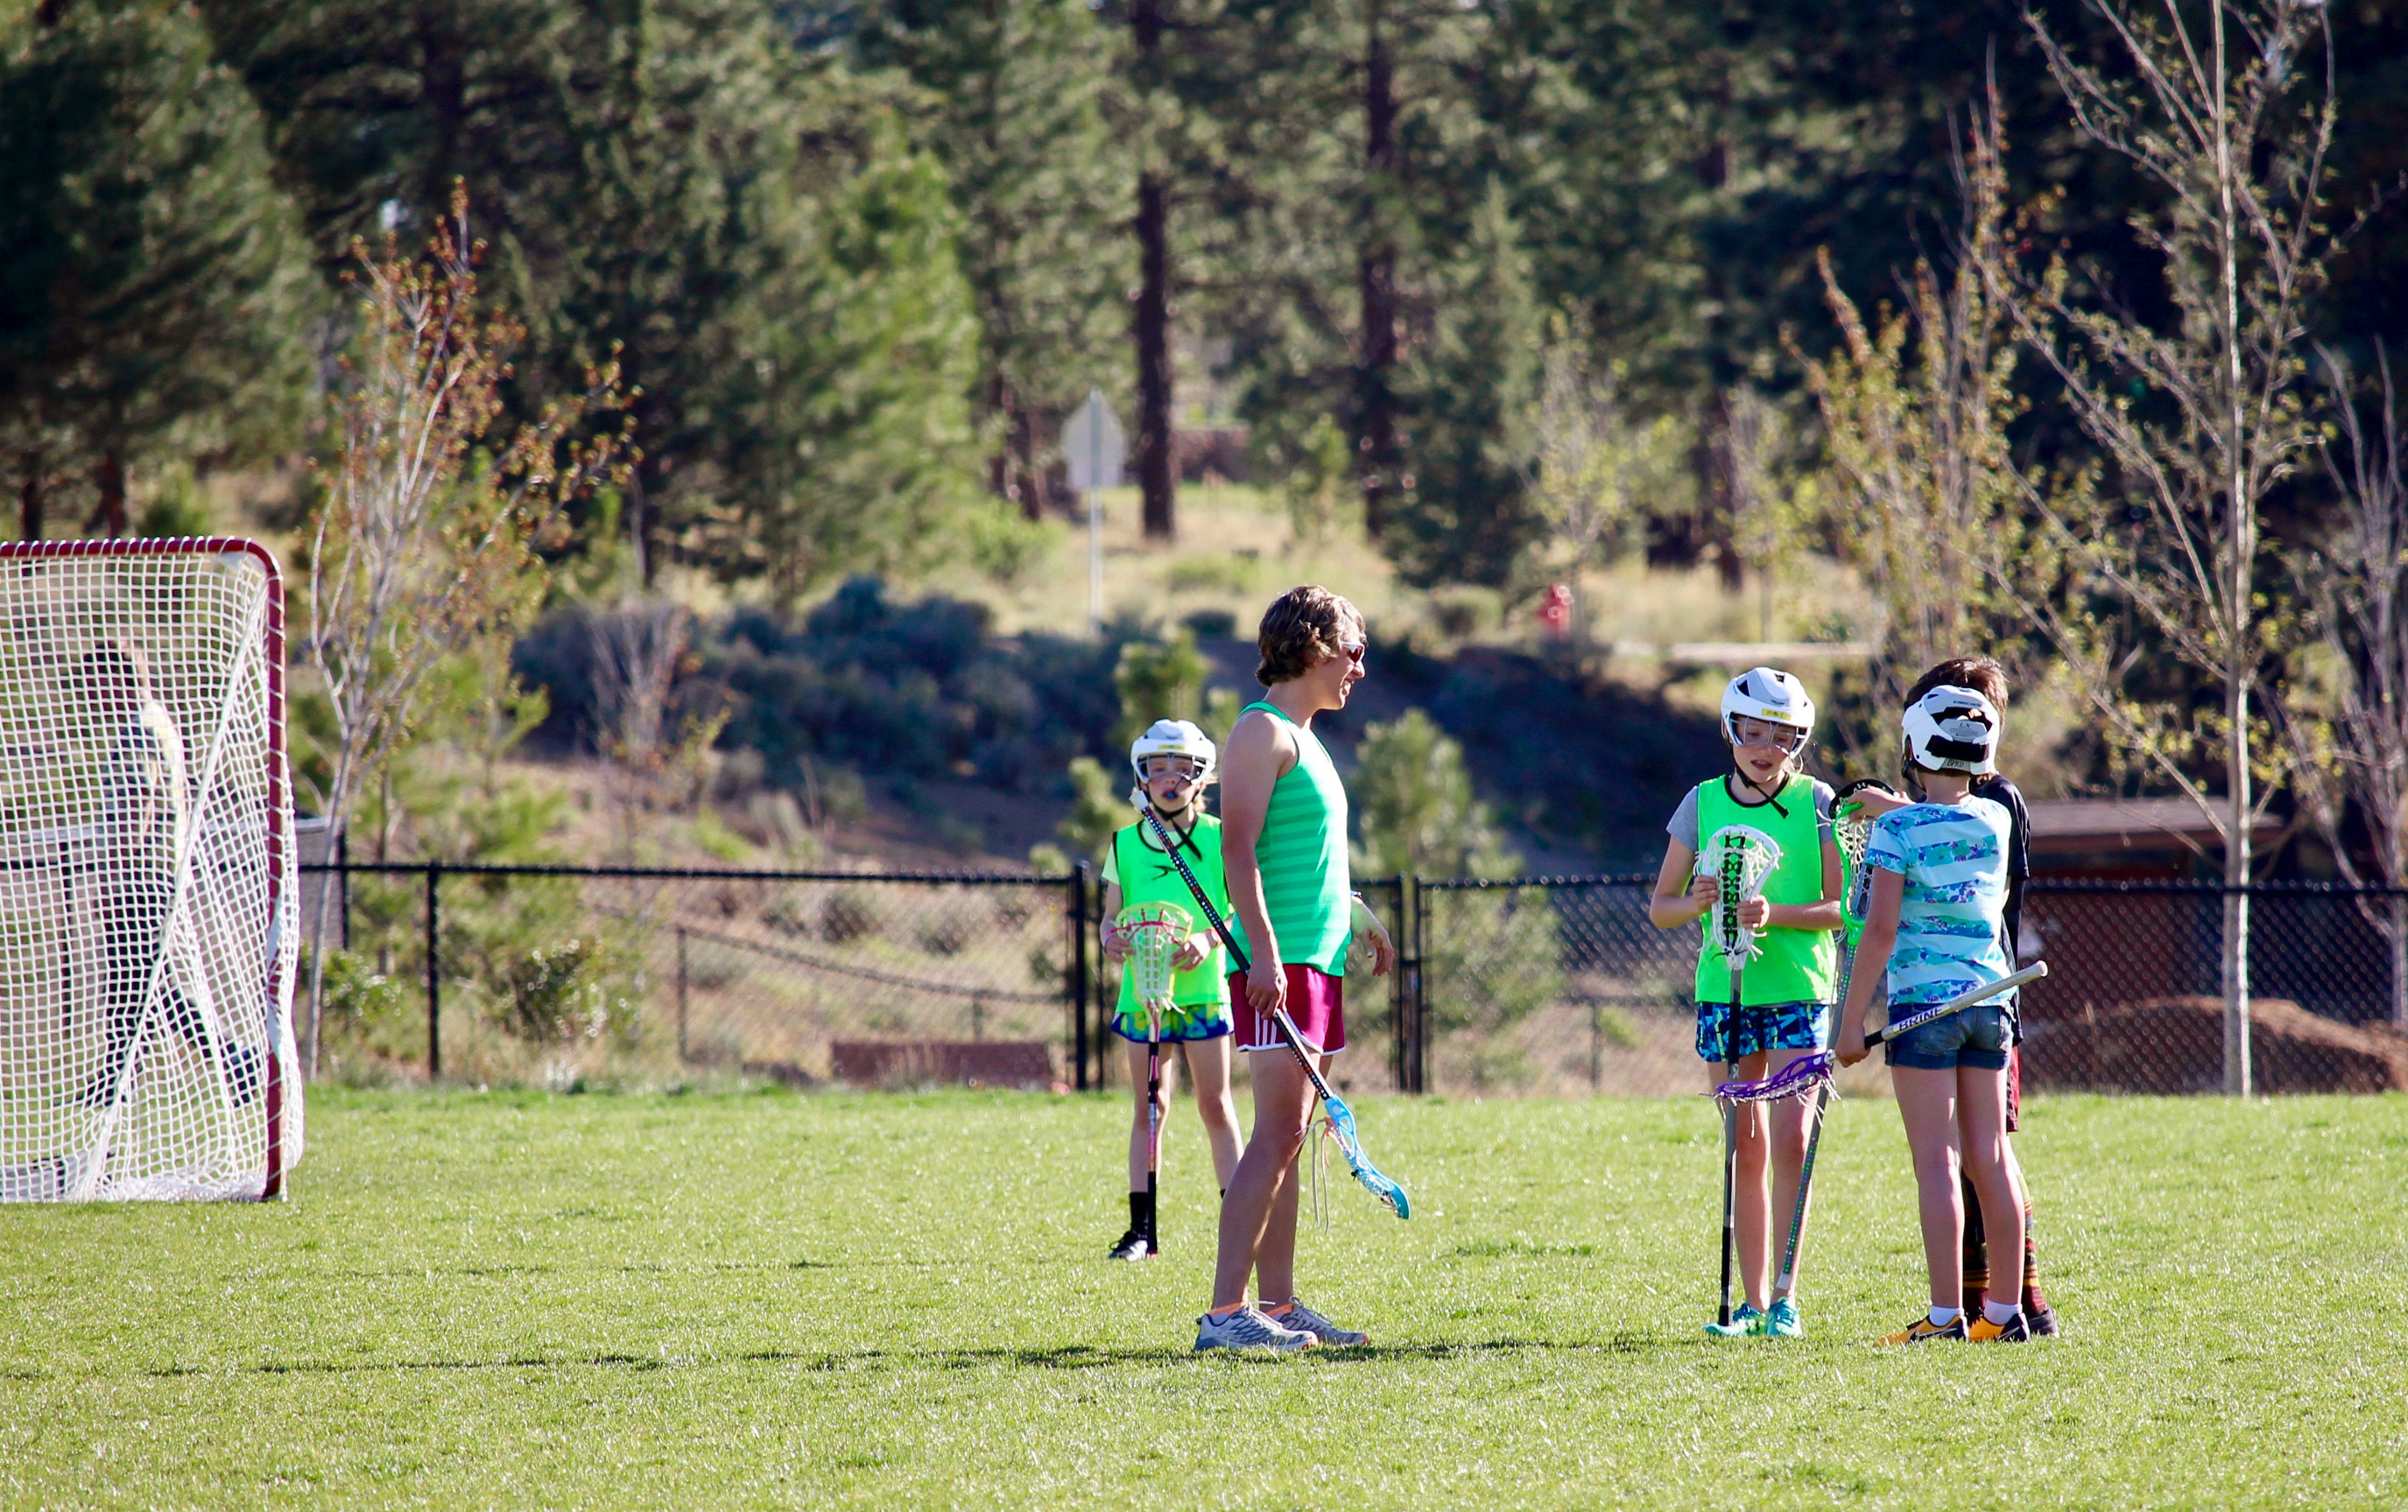 As of this year, registrations for Bend Park and Recreation District sports leagues happen on their own day, independently of other program registrations. The district hopes staggering the growing demand can prevent bottlenecks and website failures.